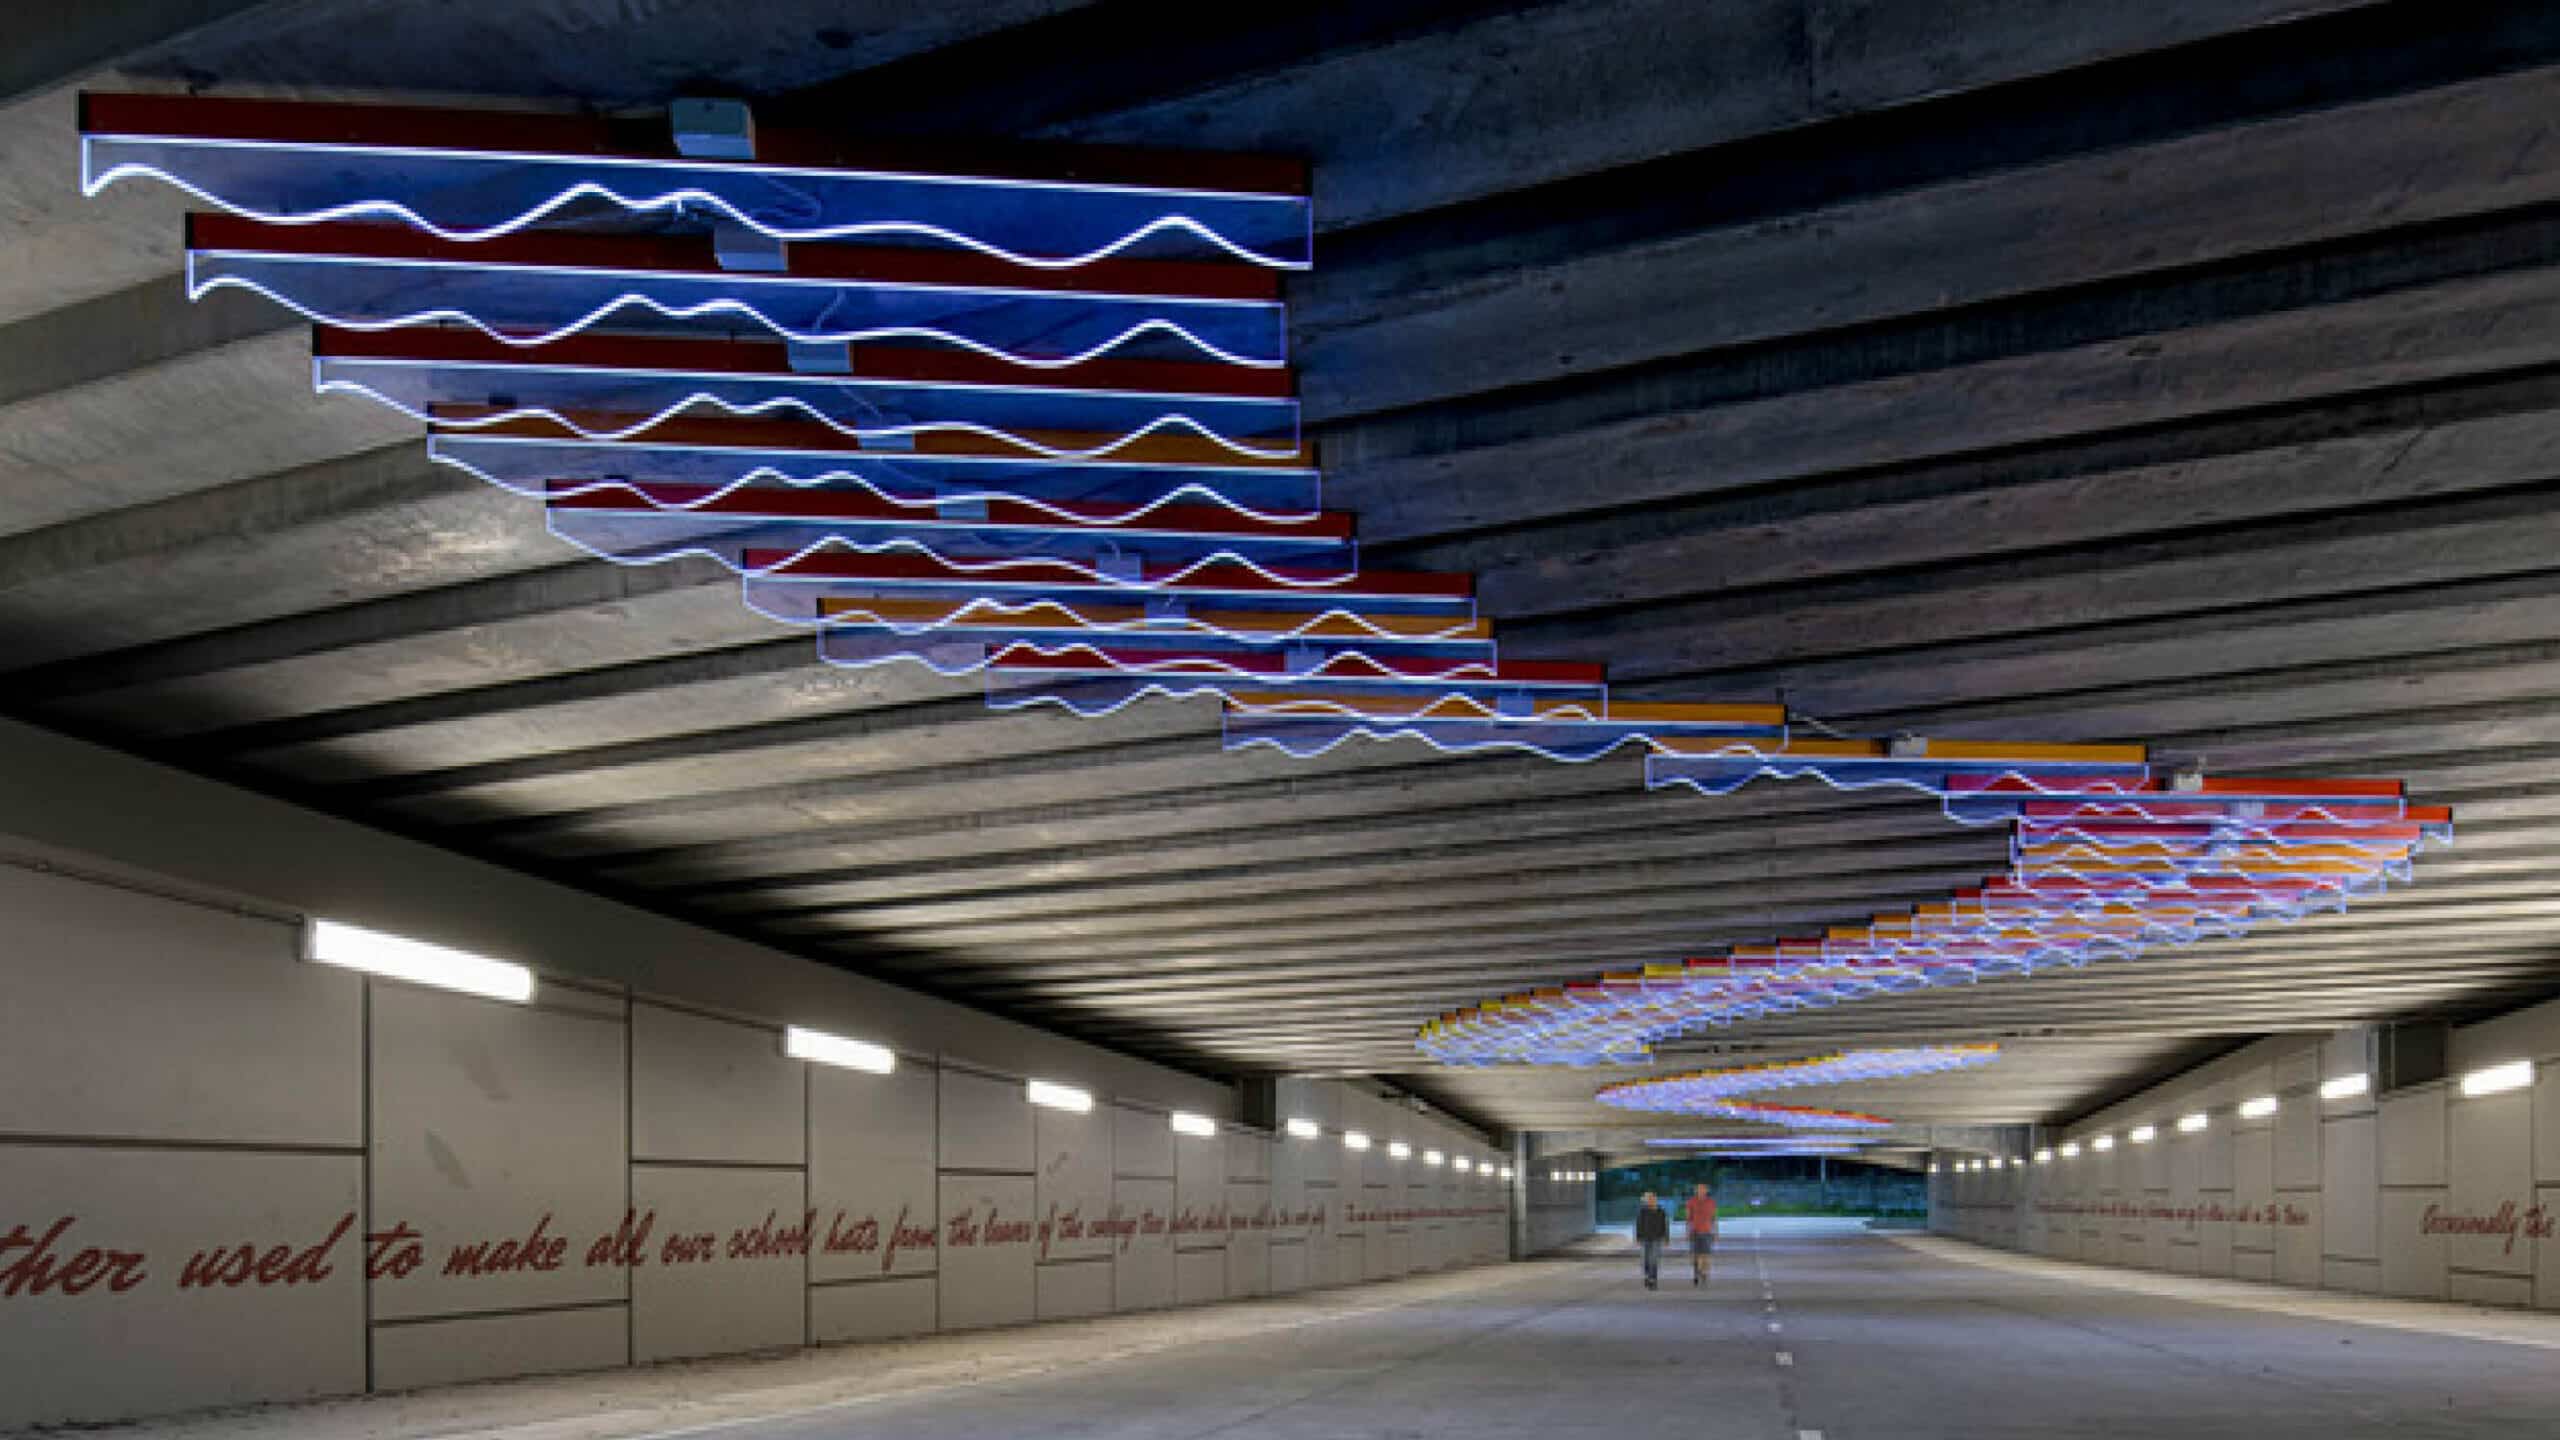 Wolli Sculptural Lighting Installation Rippled Waves Suspended Top of Tunnel